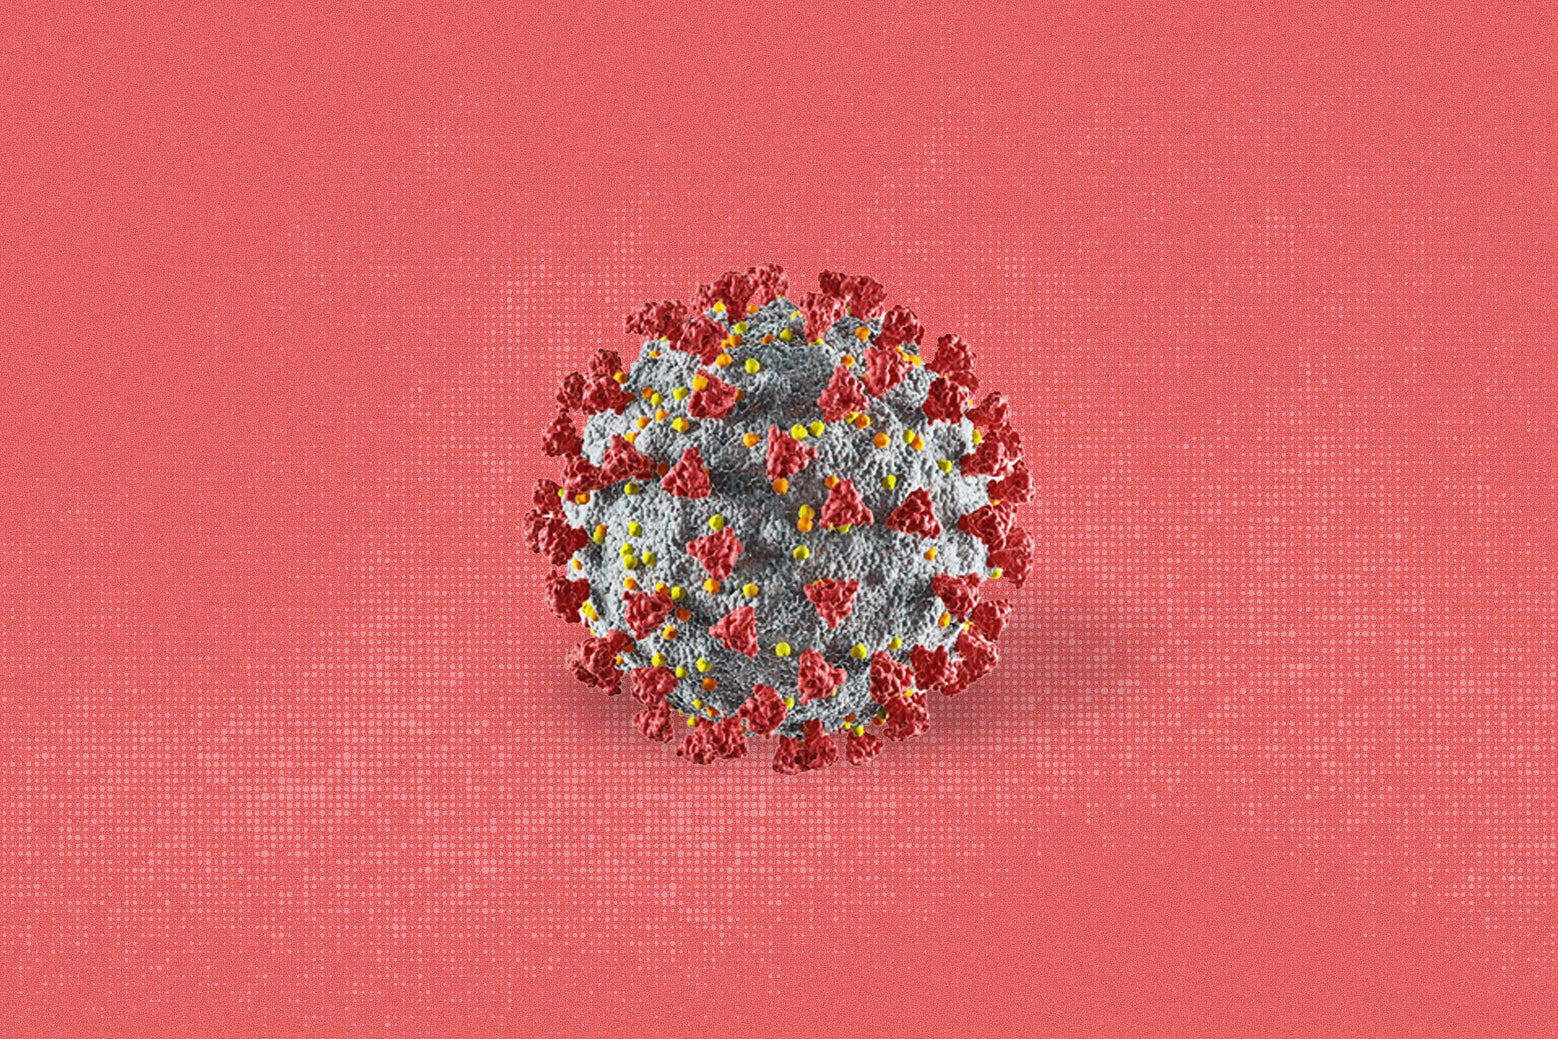 A COVID spike protein against a red background.